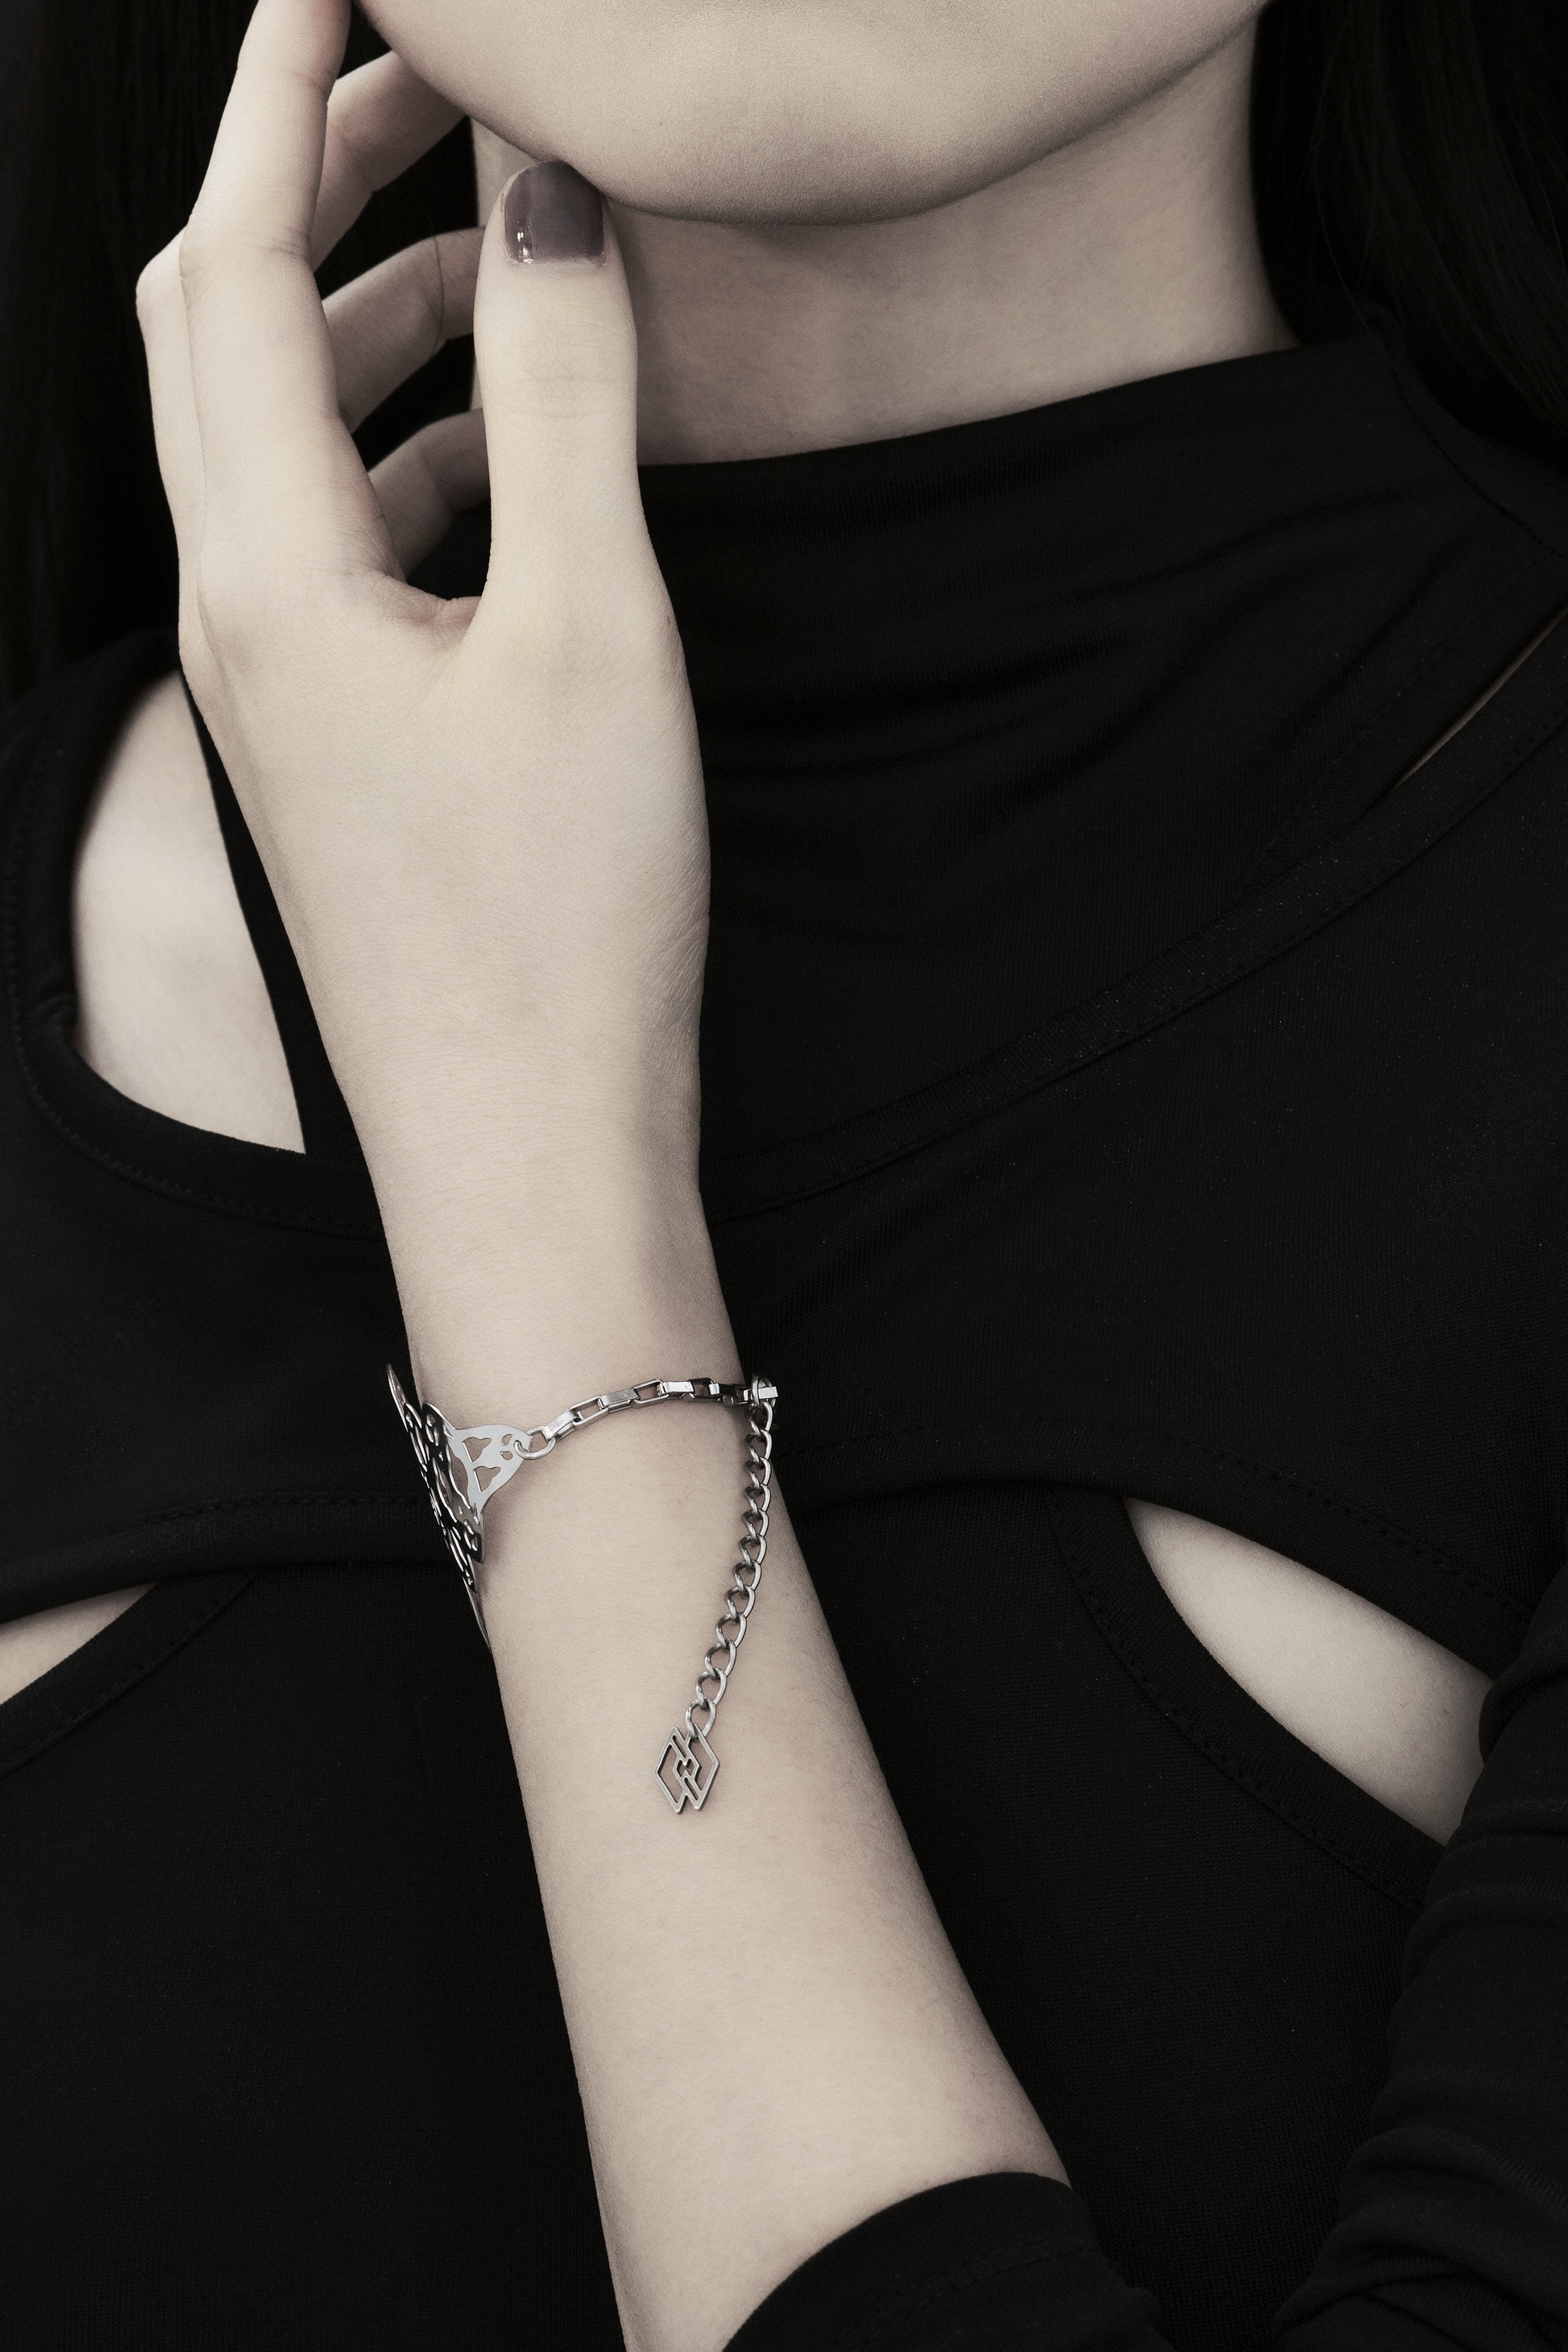 A model is featured wearing a Myril Jewels bracelet with a gothic architecture design. The intricate cut-out pattern creates a stunning visual effect against the simplicity of the black attire, making it a perfect accessory for those who favor gothic-chic or neo-goth styles, whether for daily wear or special events.